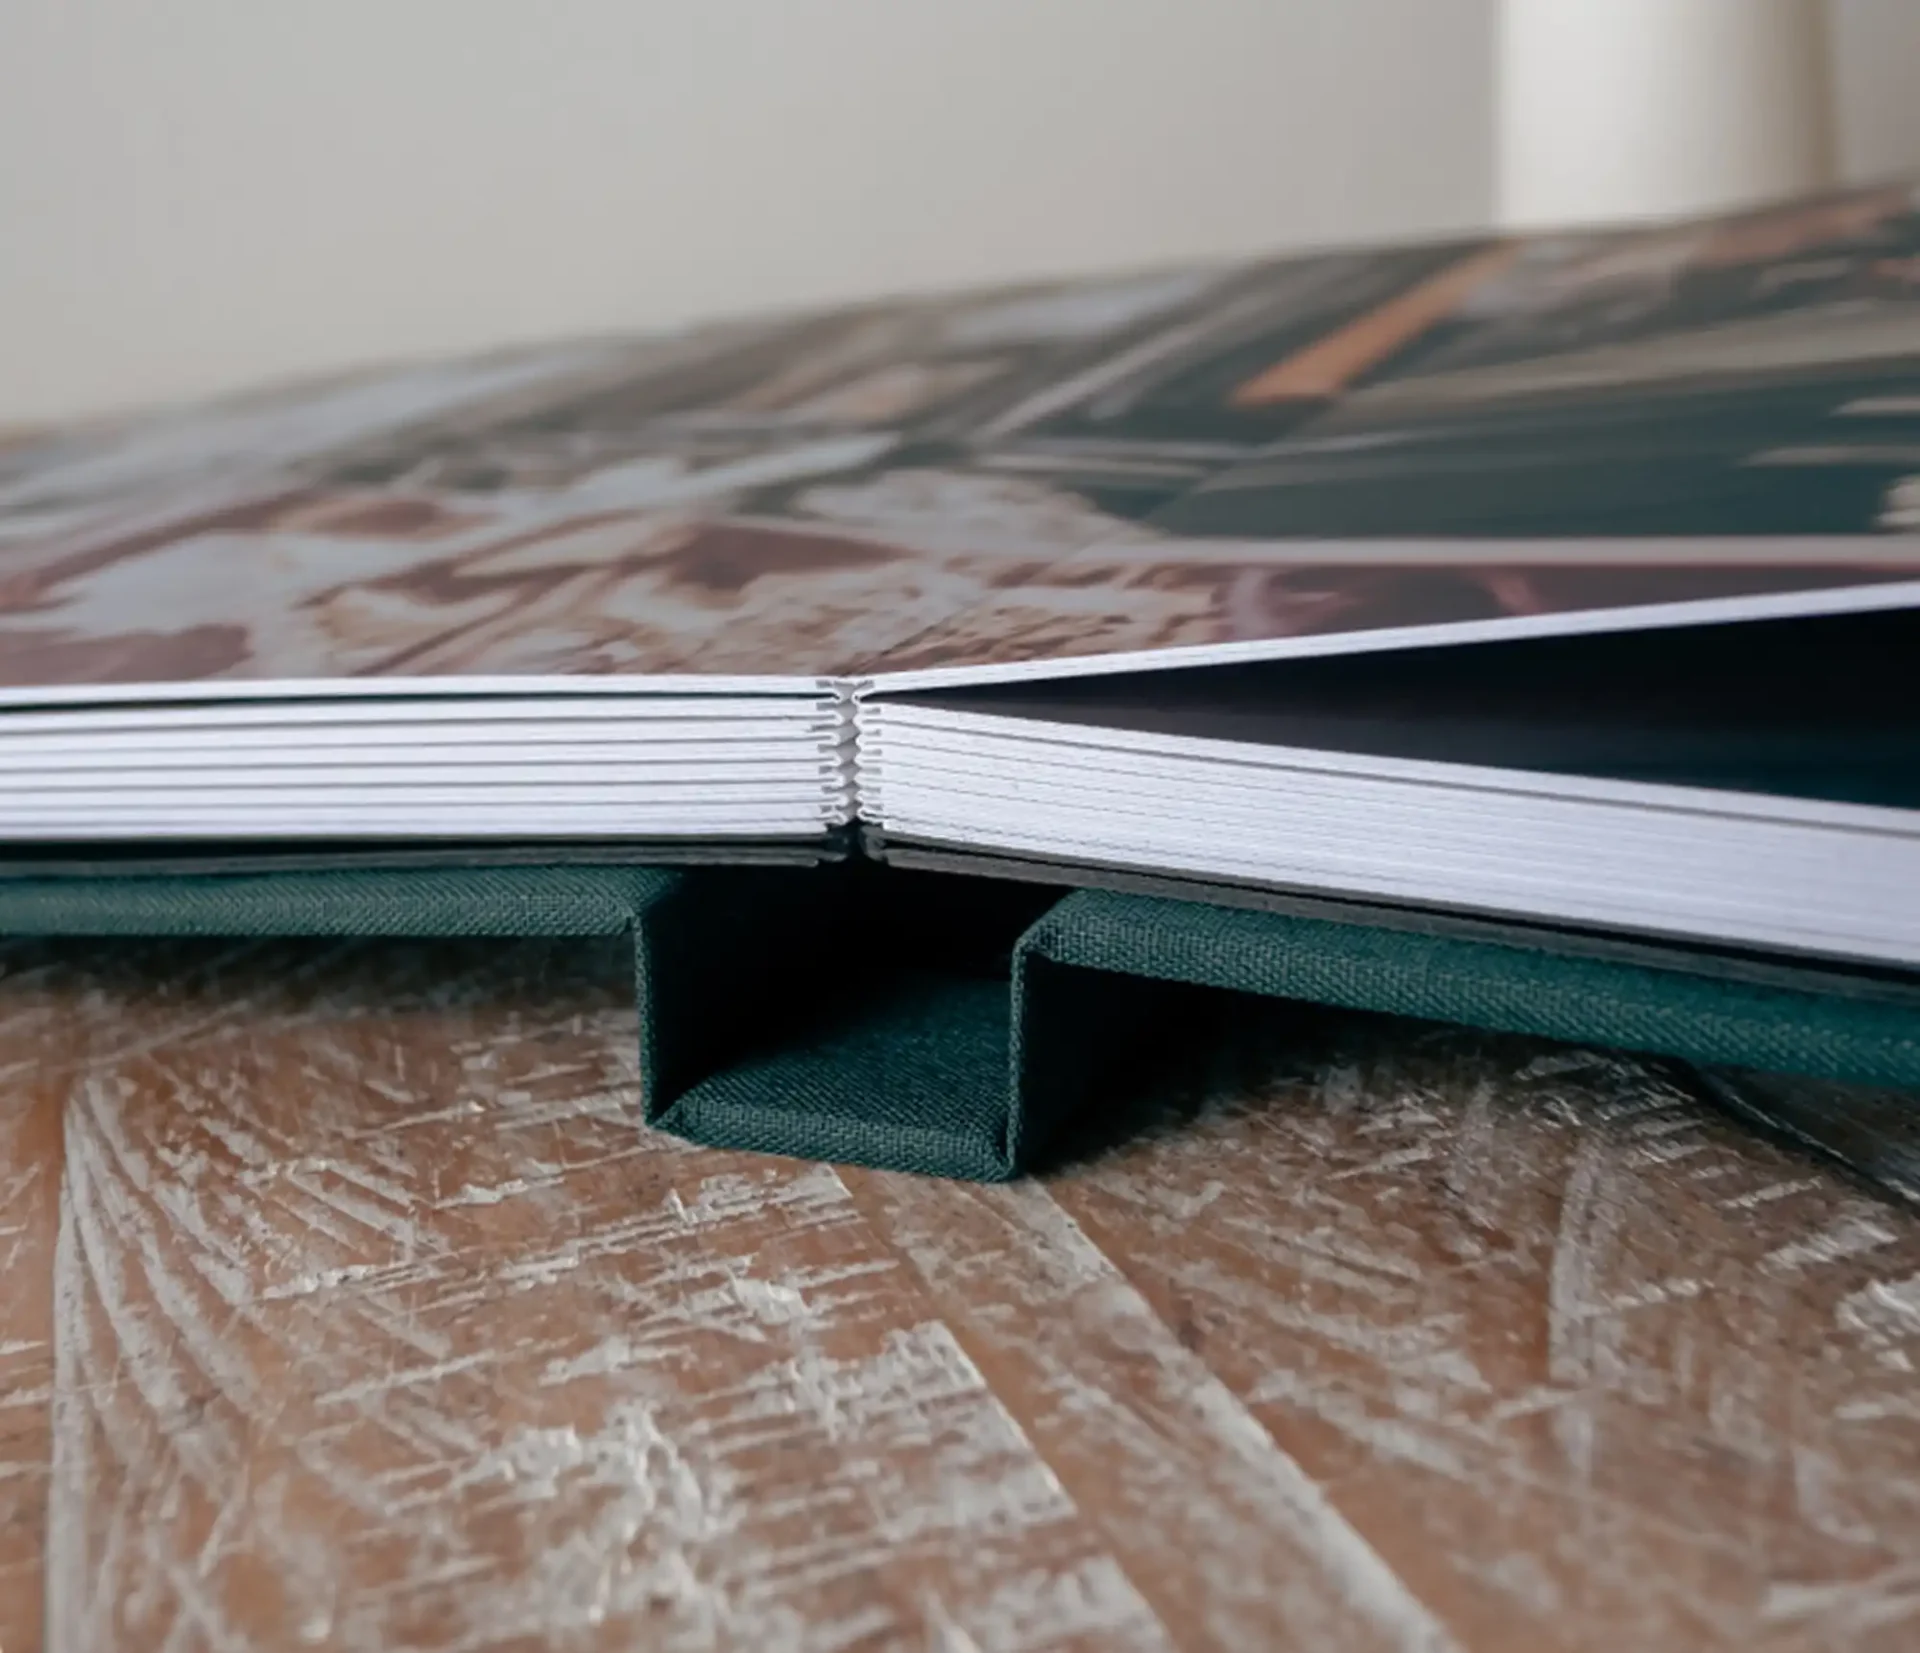 Luxury wedding albums Scotland: Close-up of an open photo book placed on a wooden surface, showing the binding and edges of the pages.